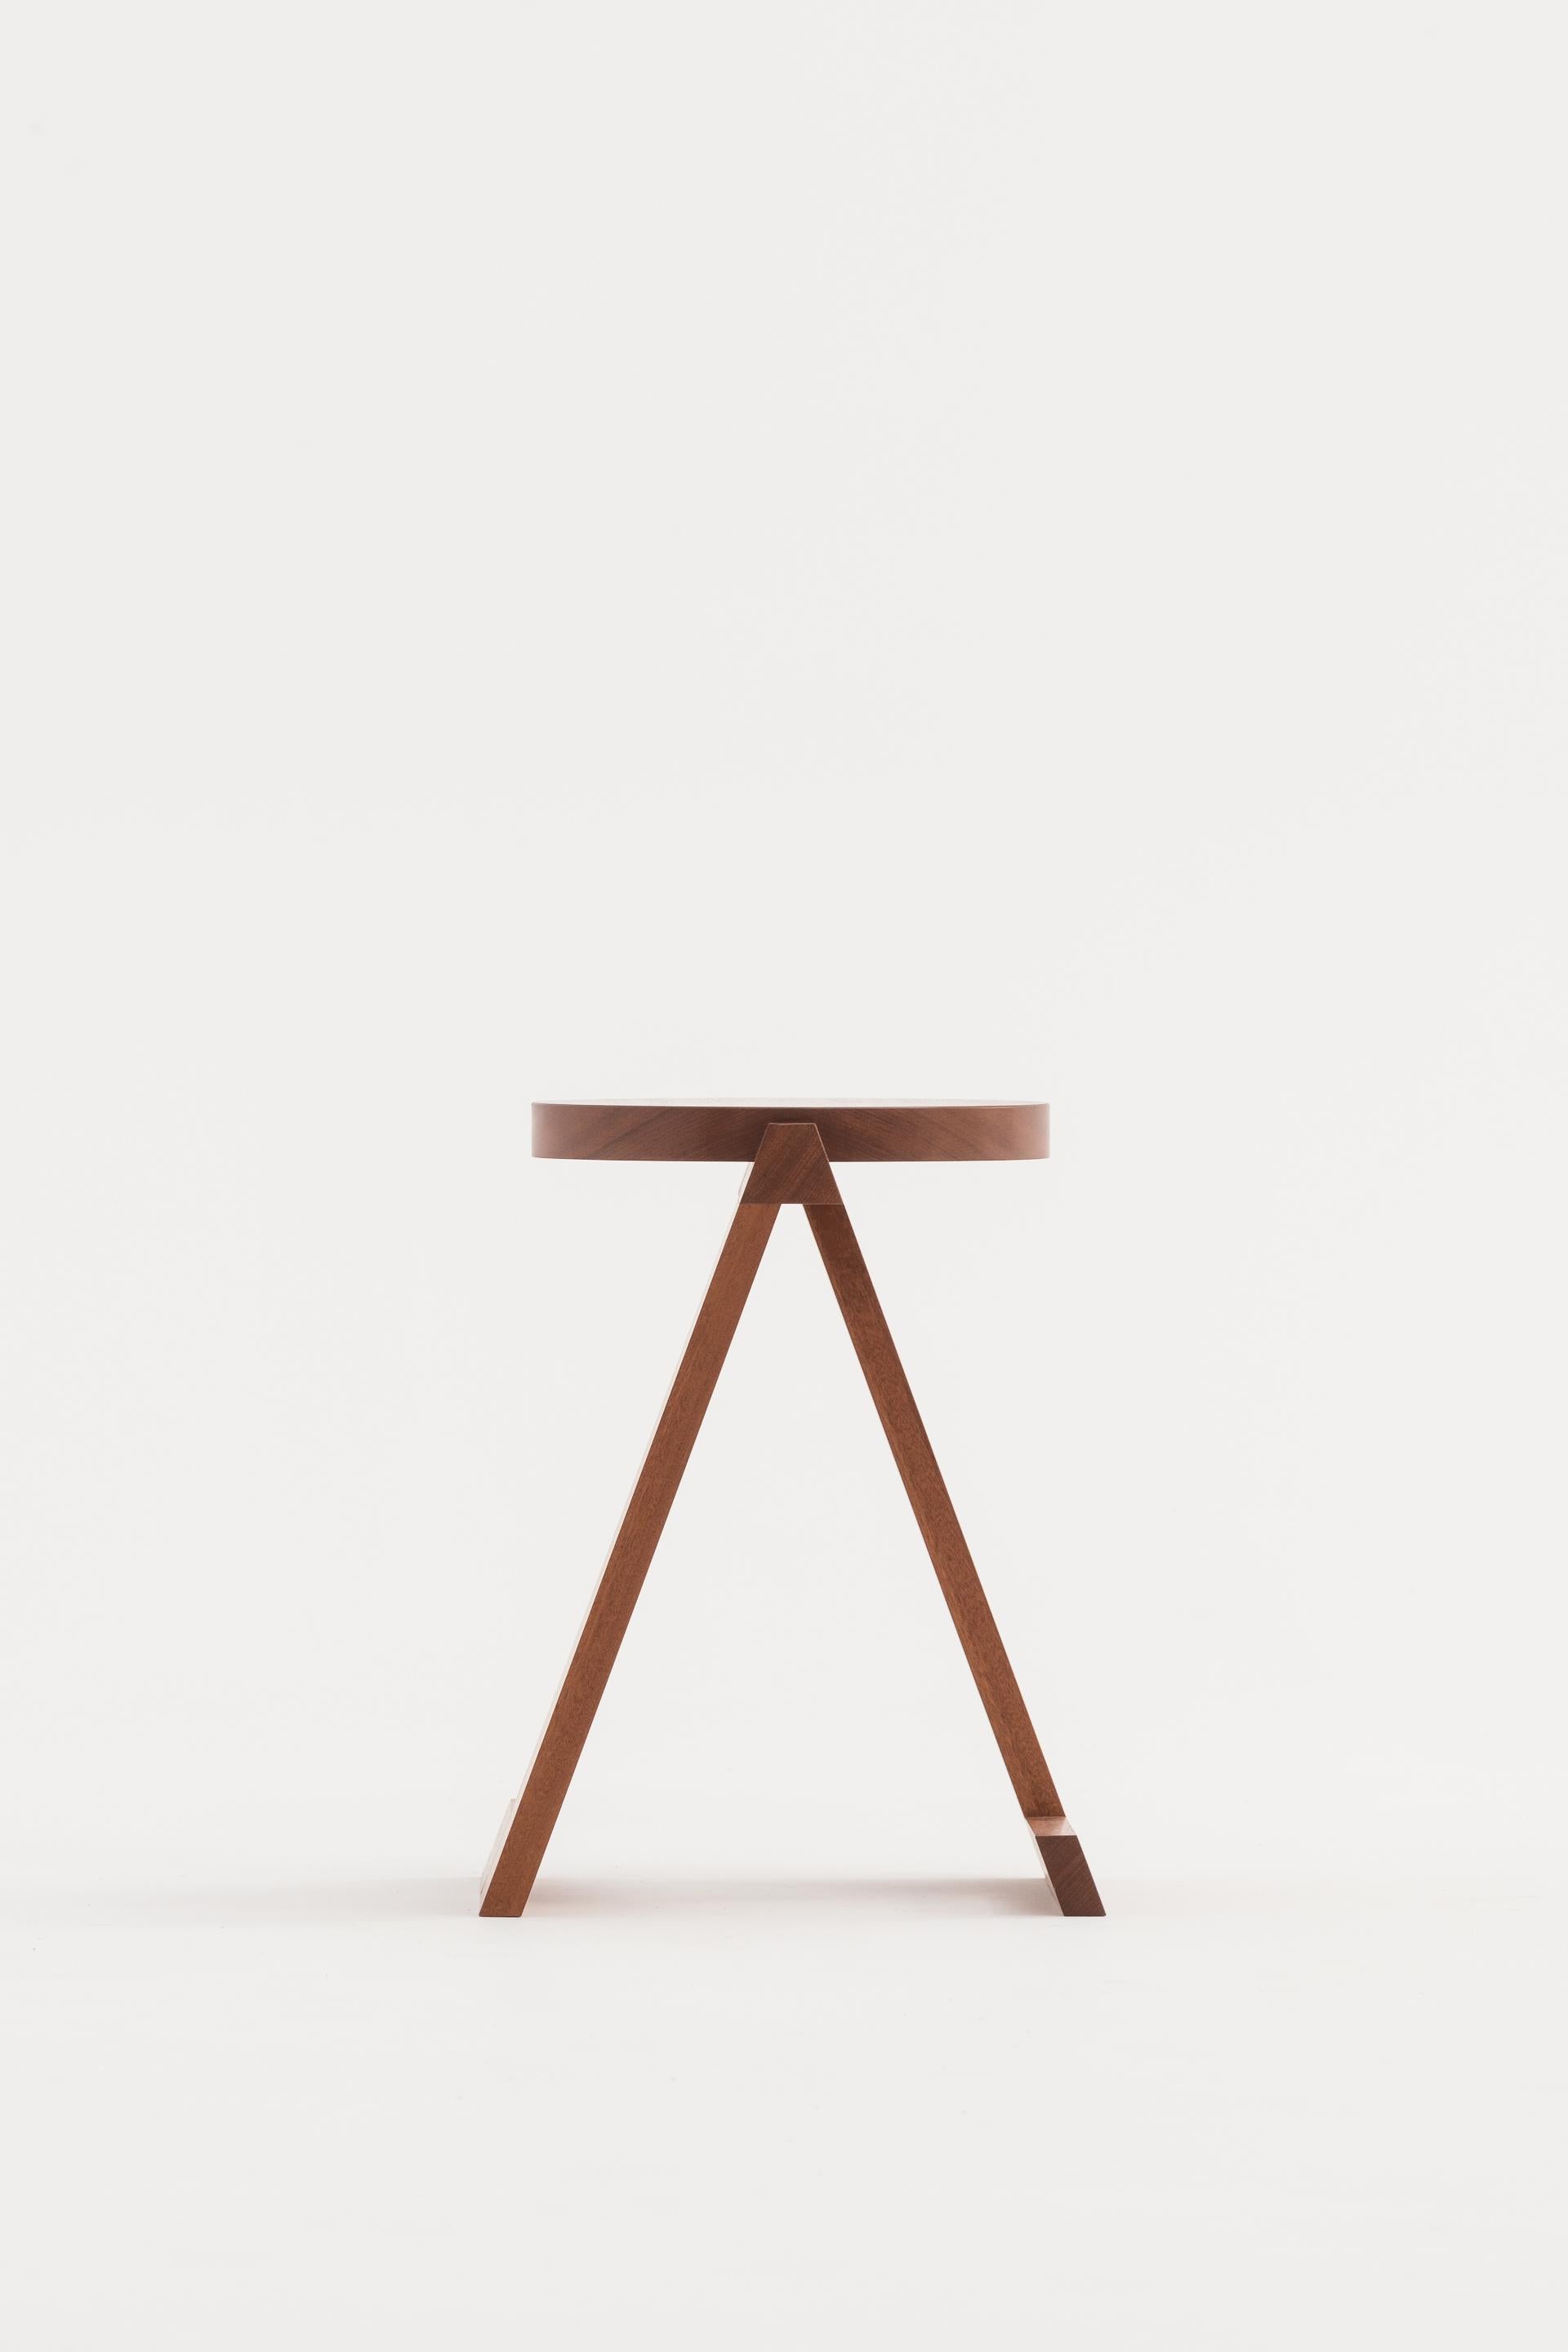 Contemporary Aleksander Oniszh Pawn Stool by Nów For Sale